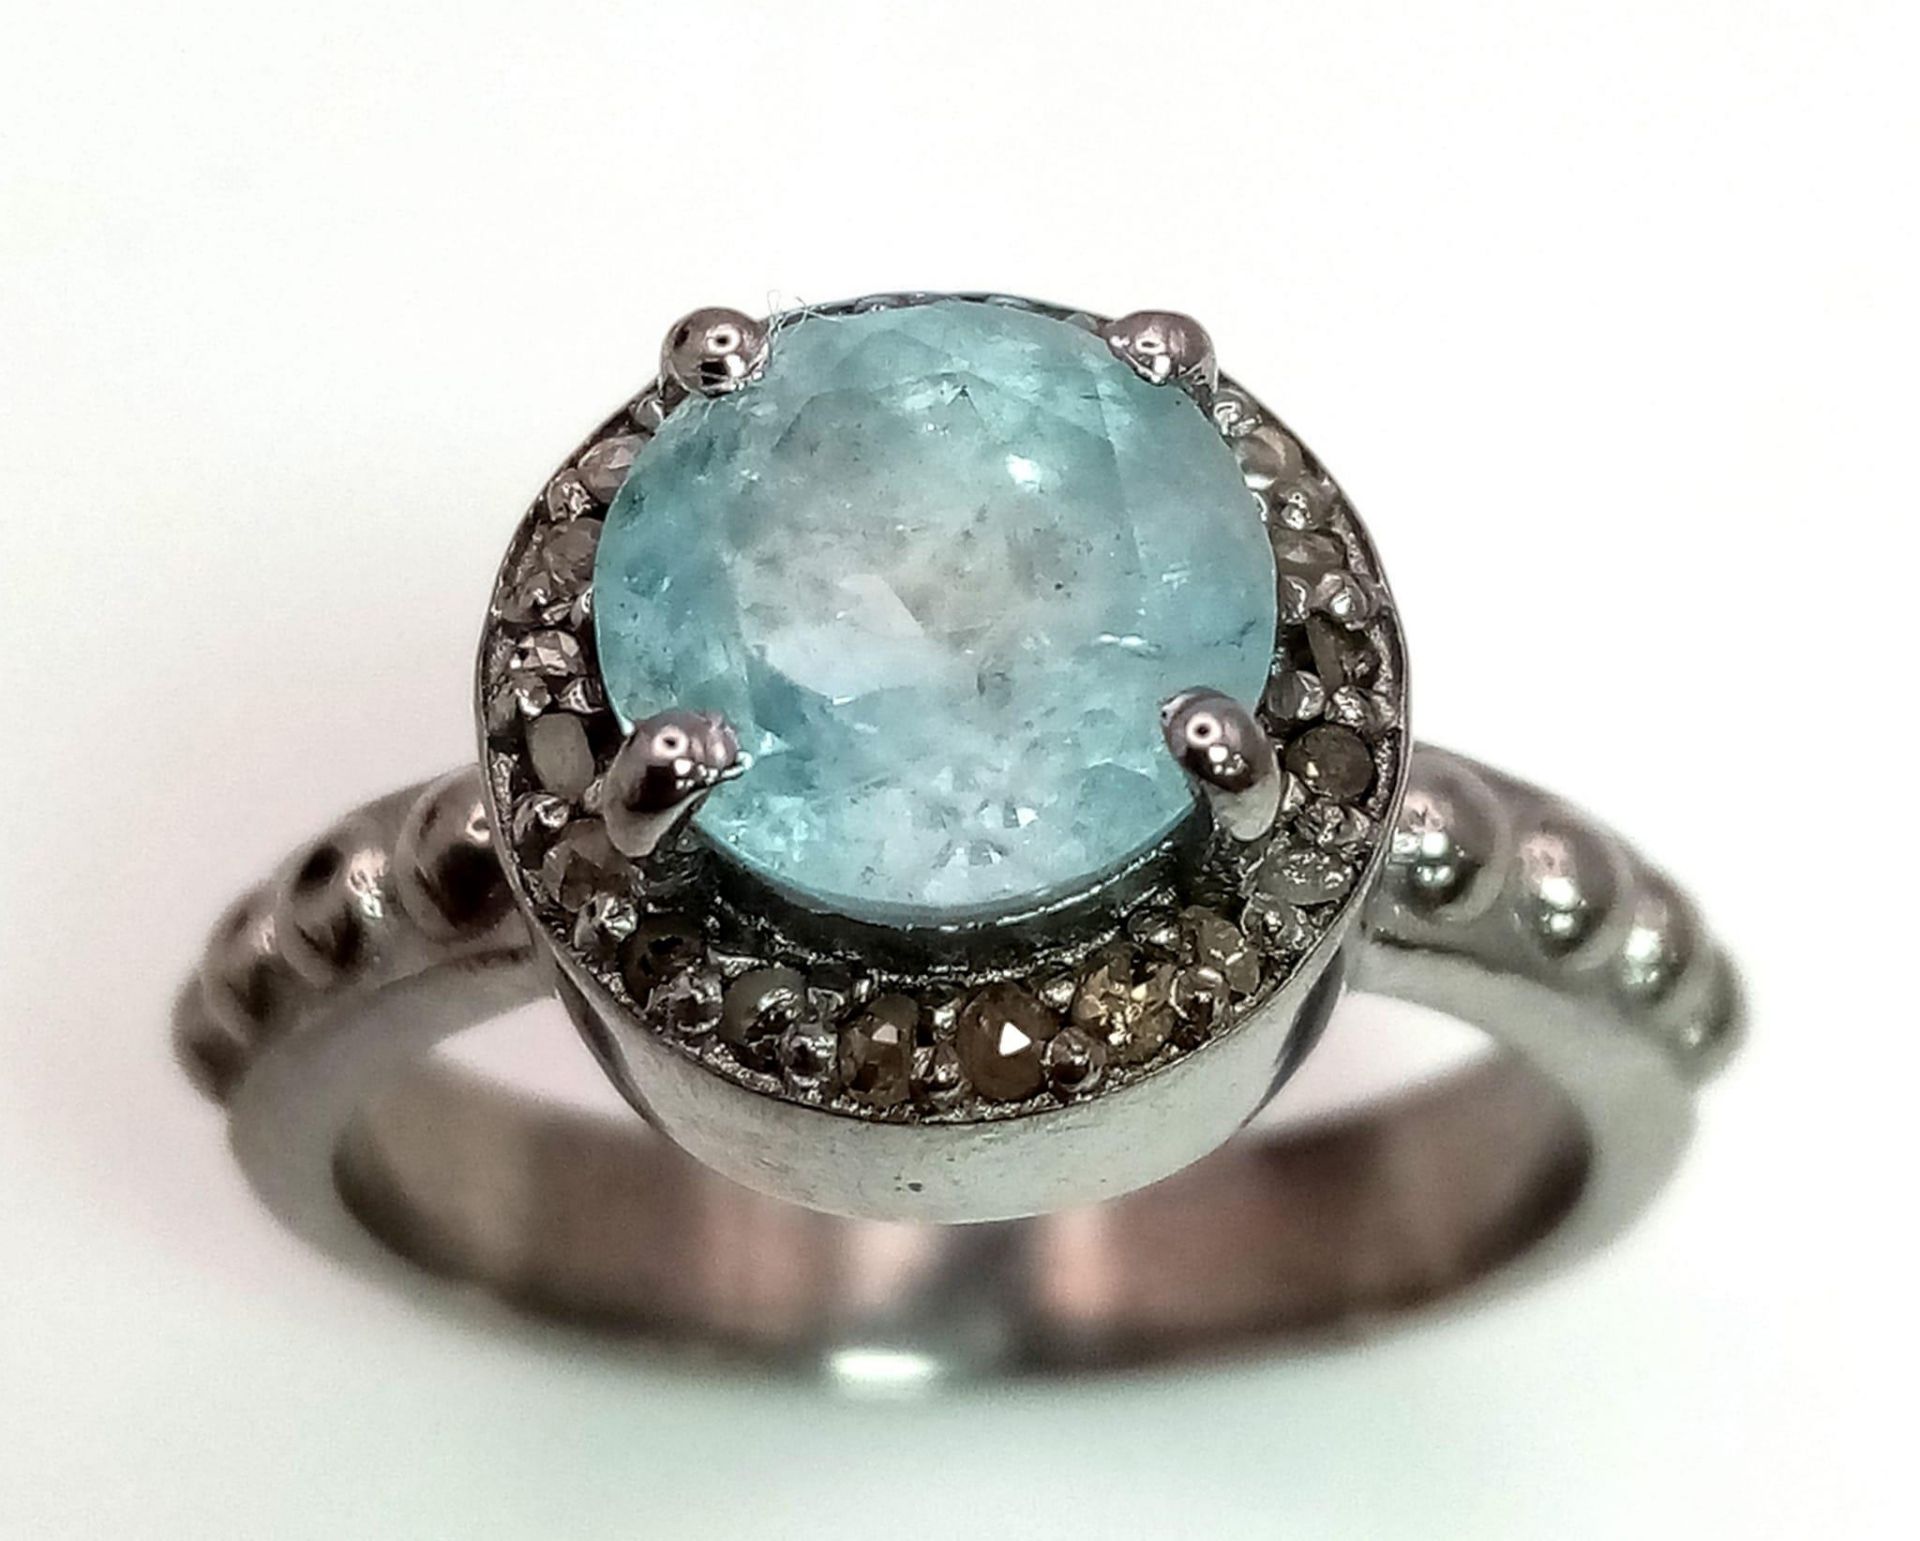 A Blue Topaz Ring with a Rose cut Diamond Halo. Set in 925 Sterling Silver. 1.50ct topaz. Diamond- - Image 2 of 5